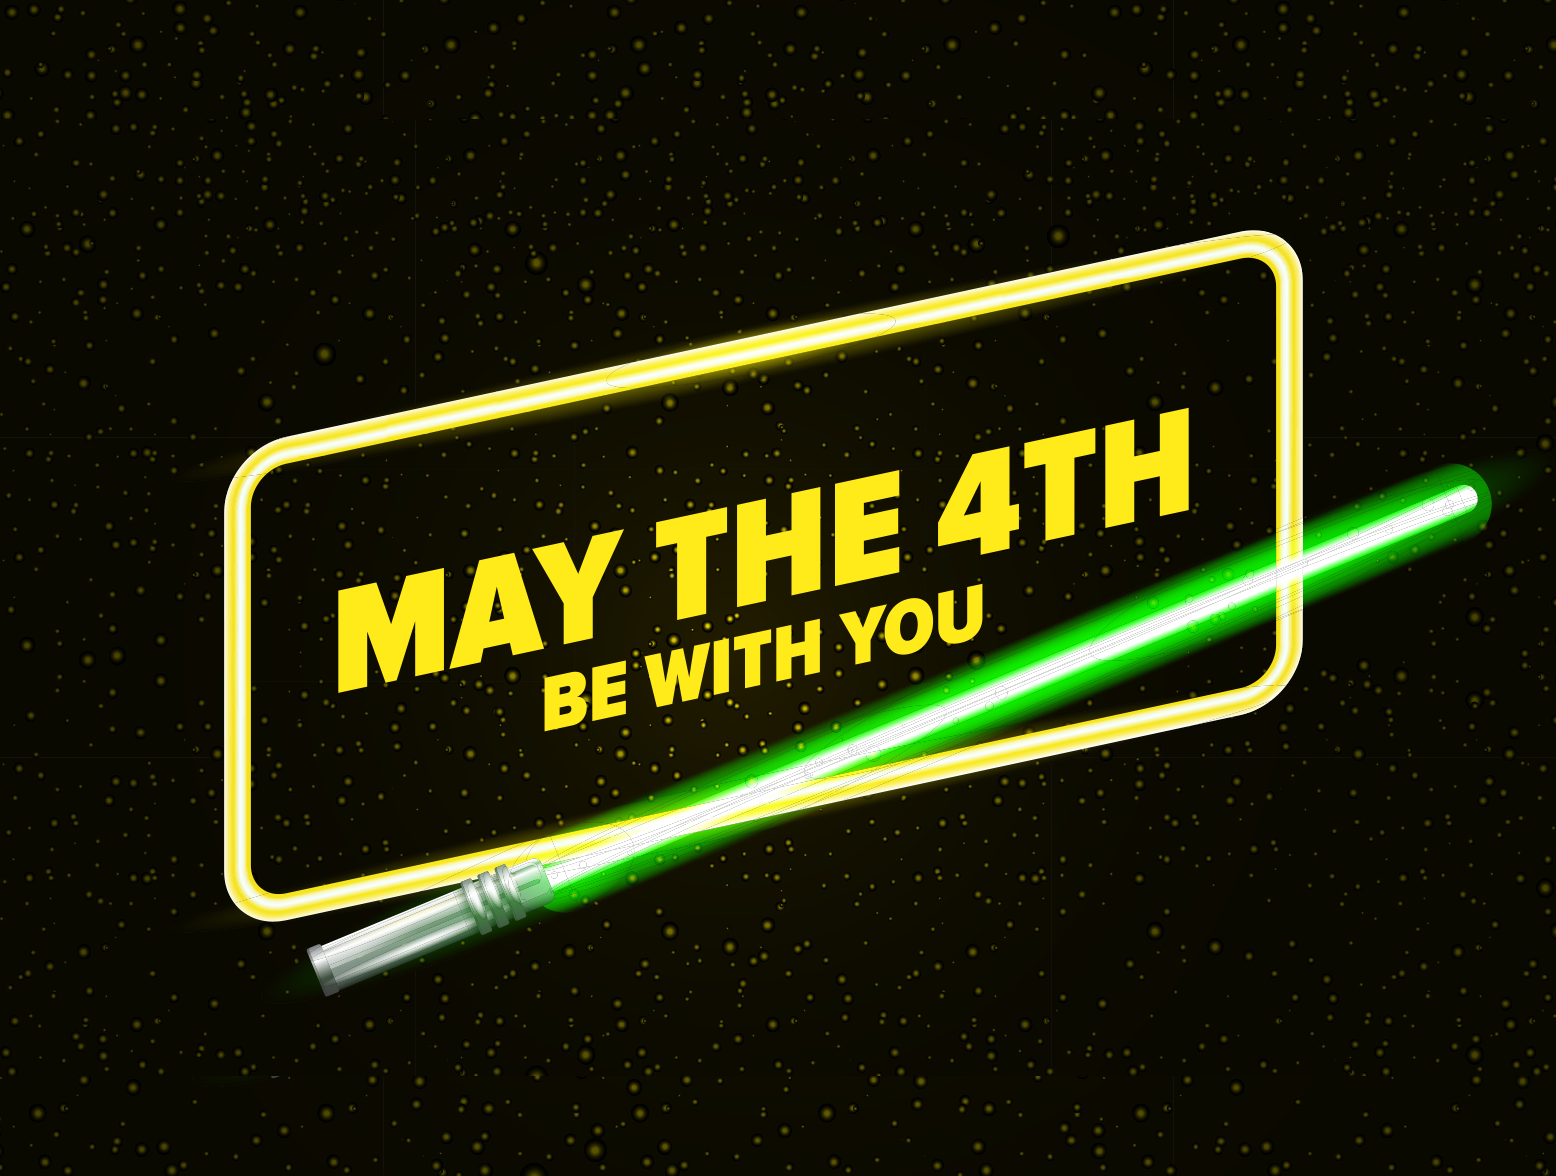 New Releases On Disney + For May The 4th! Celebrity Land International